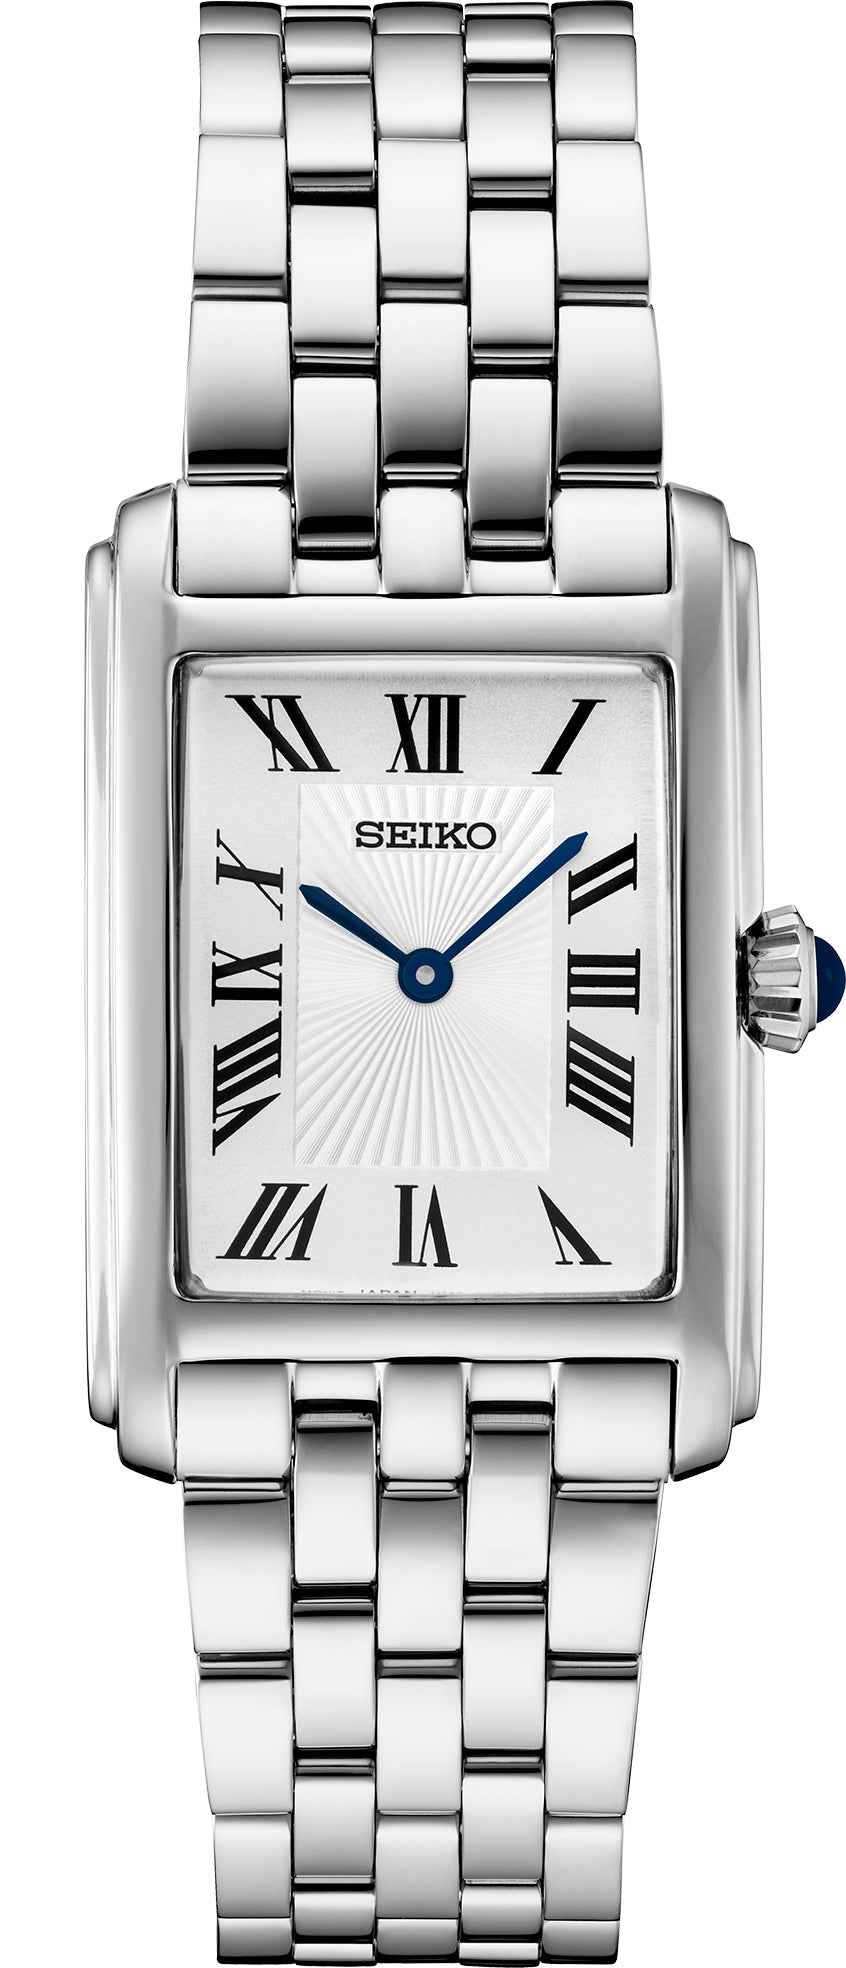 Lds Seiko Stainless Steel Rectangle Case Roman Numeral Watch SWR083